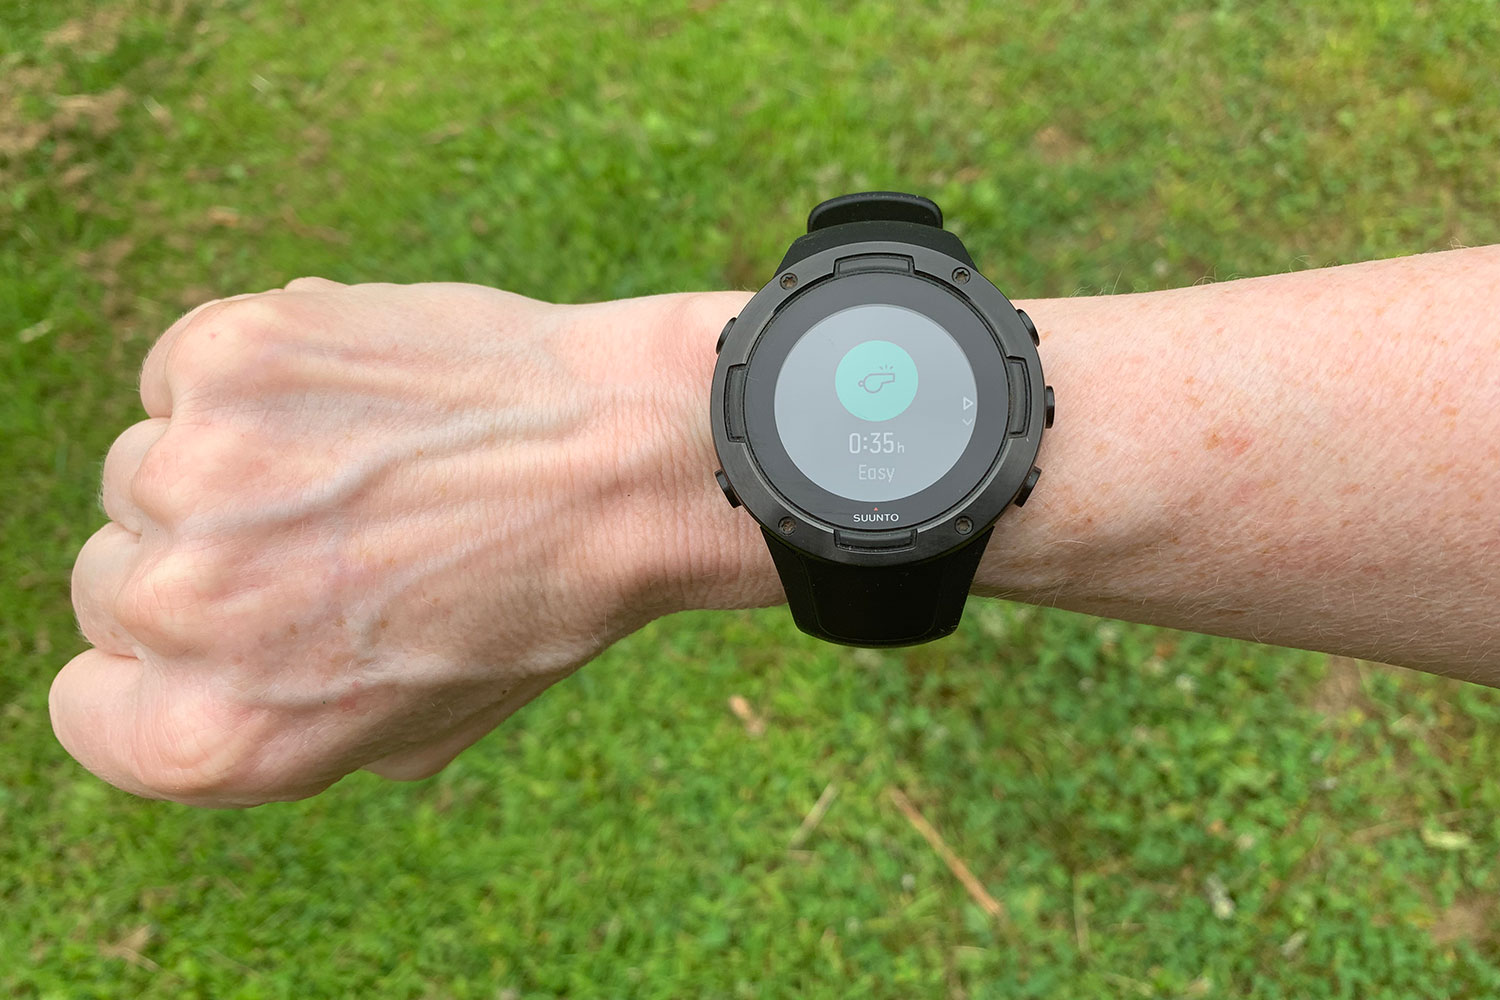 Suunto 5 Peak smartwatch review: Pricing, features, speed, screen, weight